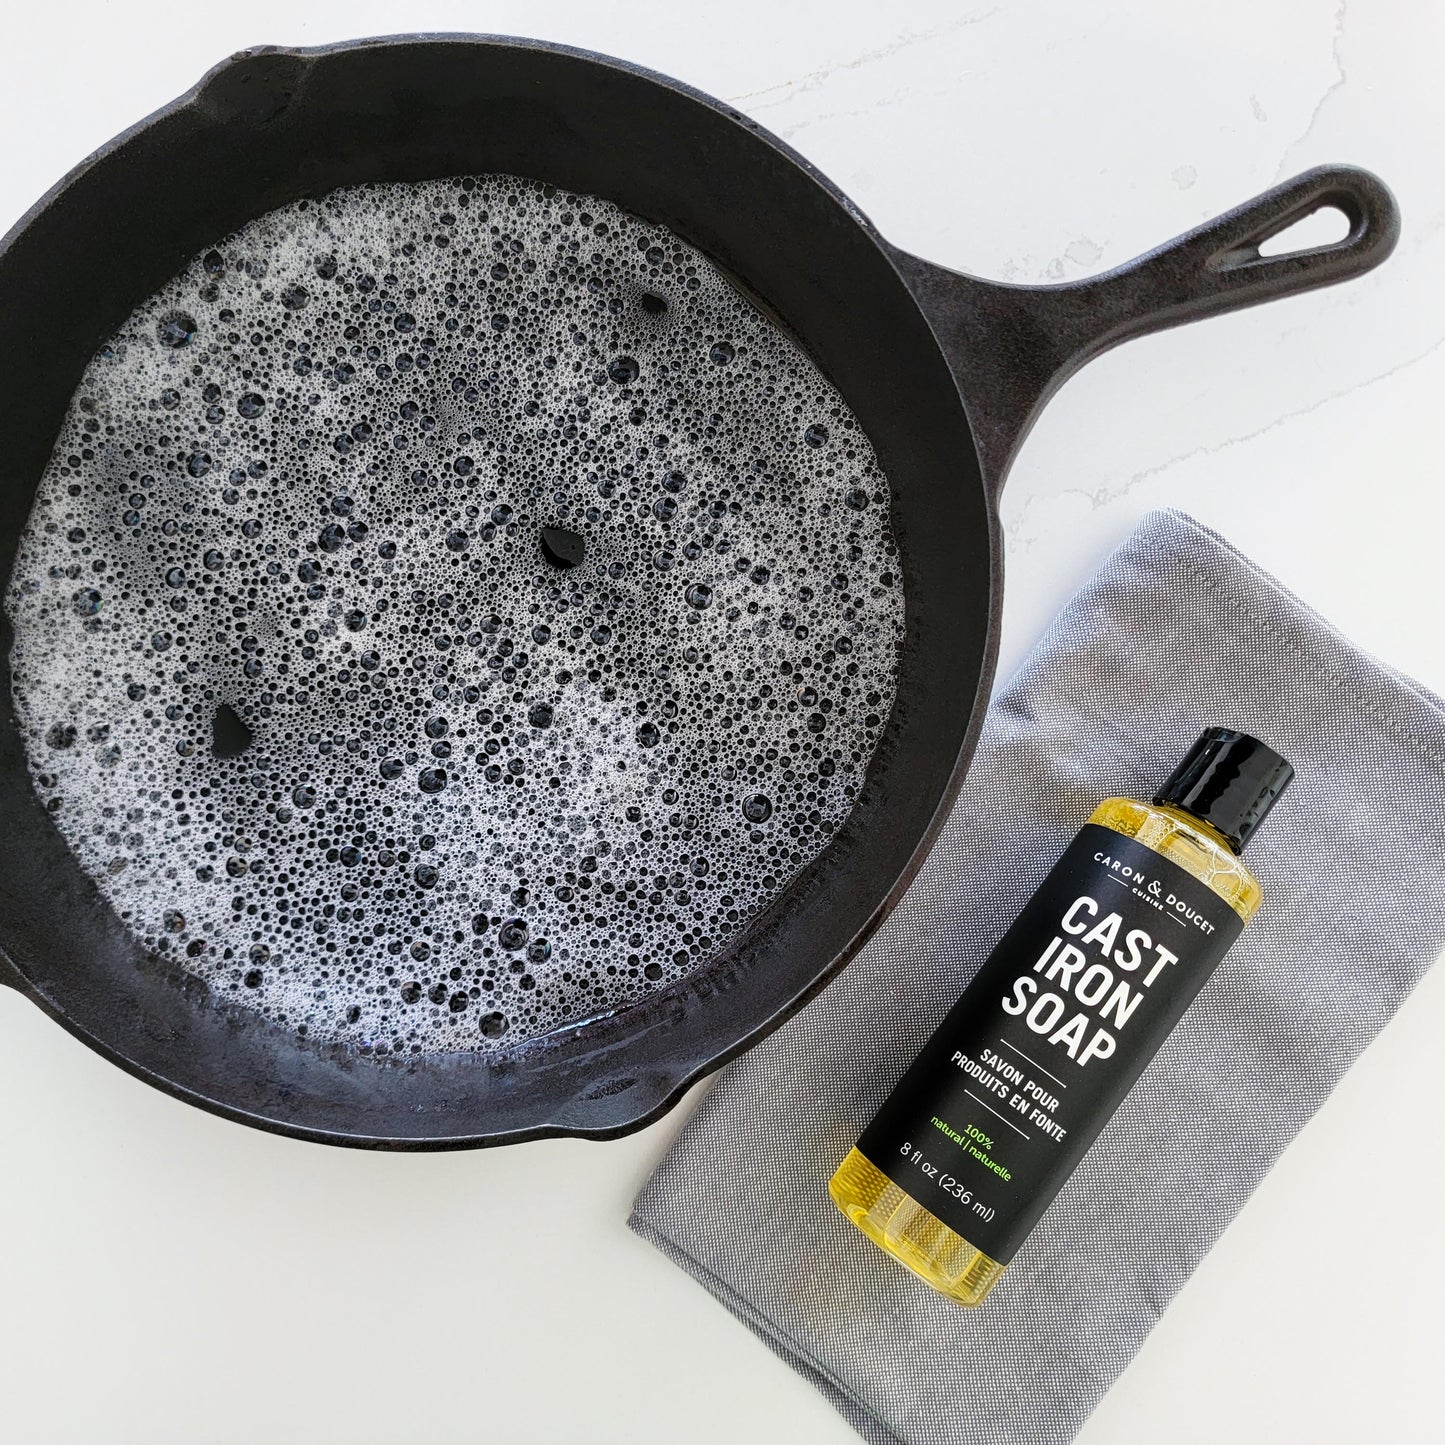 Cast Iron Cleaning Soap